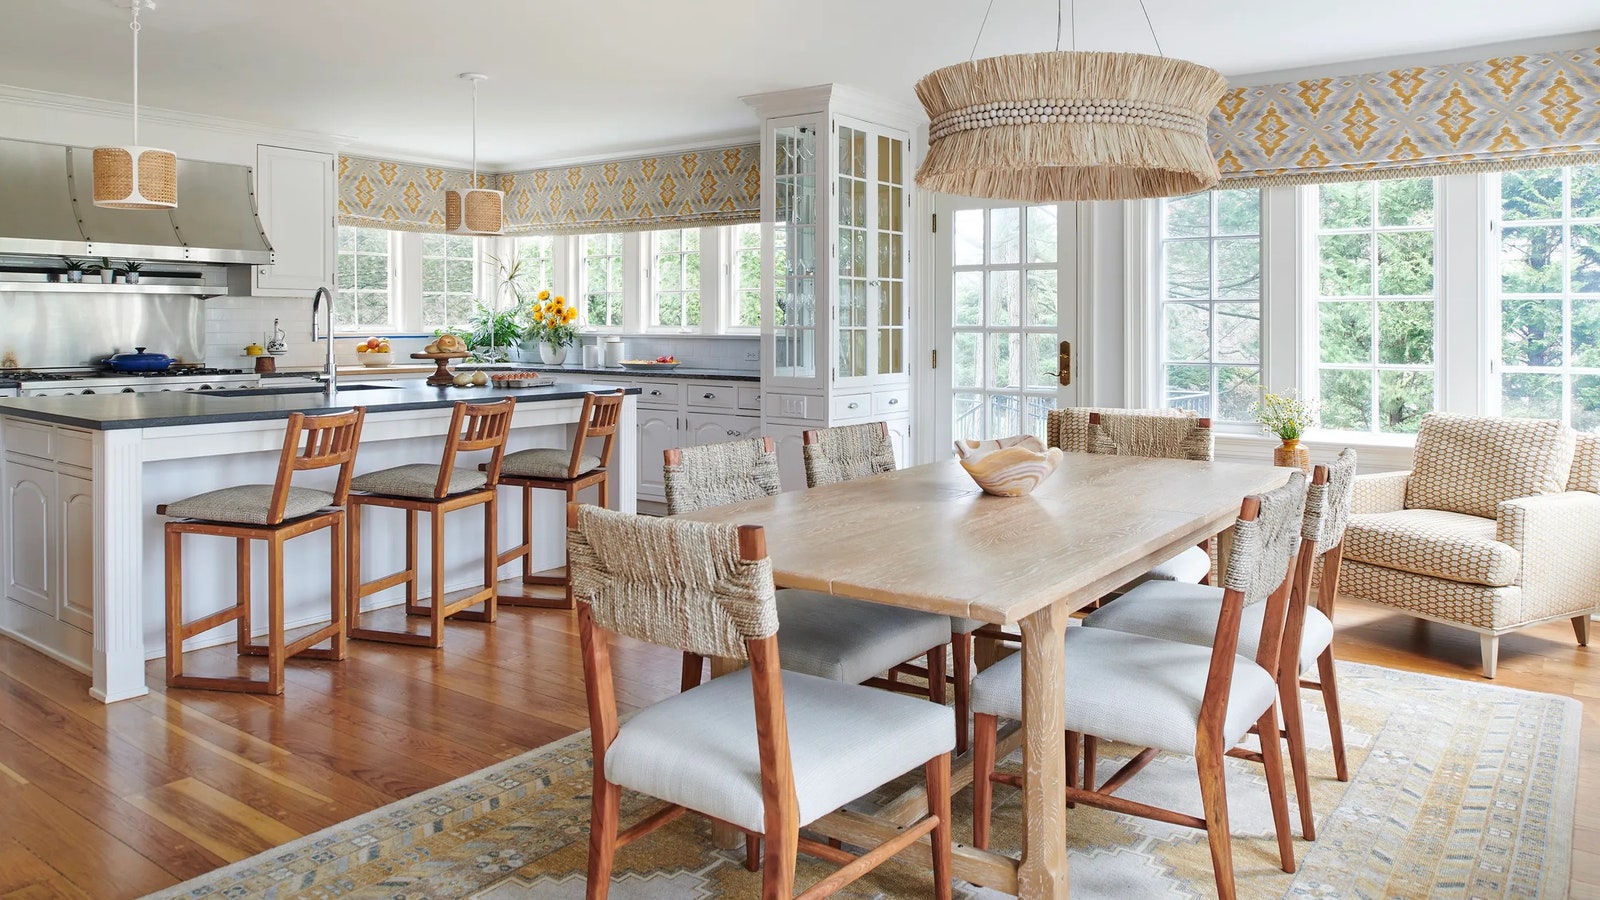 Soft sunny hues and natural fibers brighten a kitchen and breakfast area by Marni Sugerman.